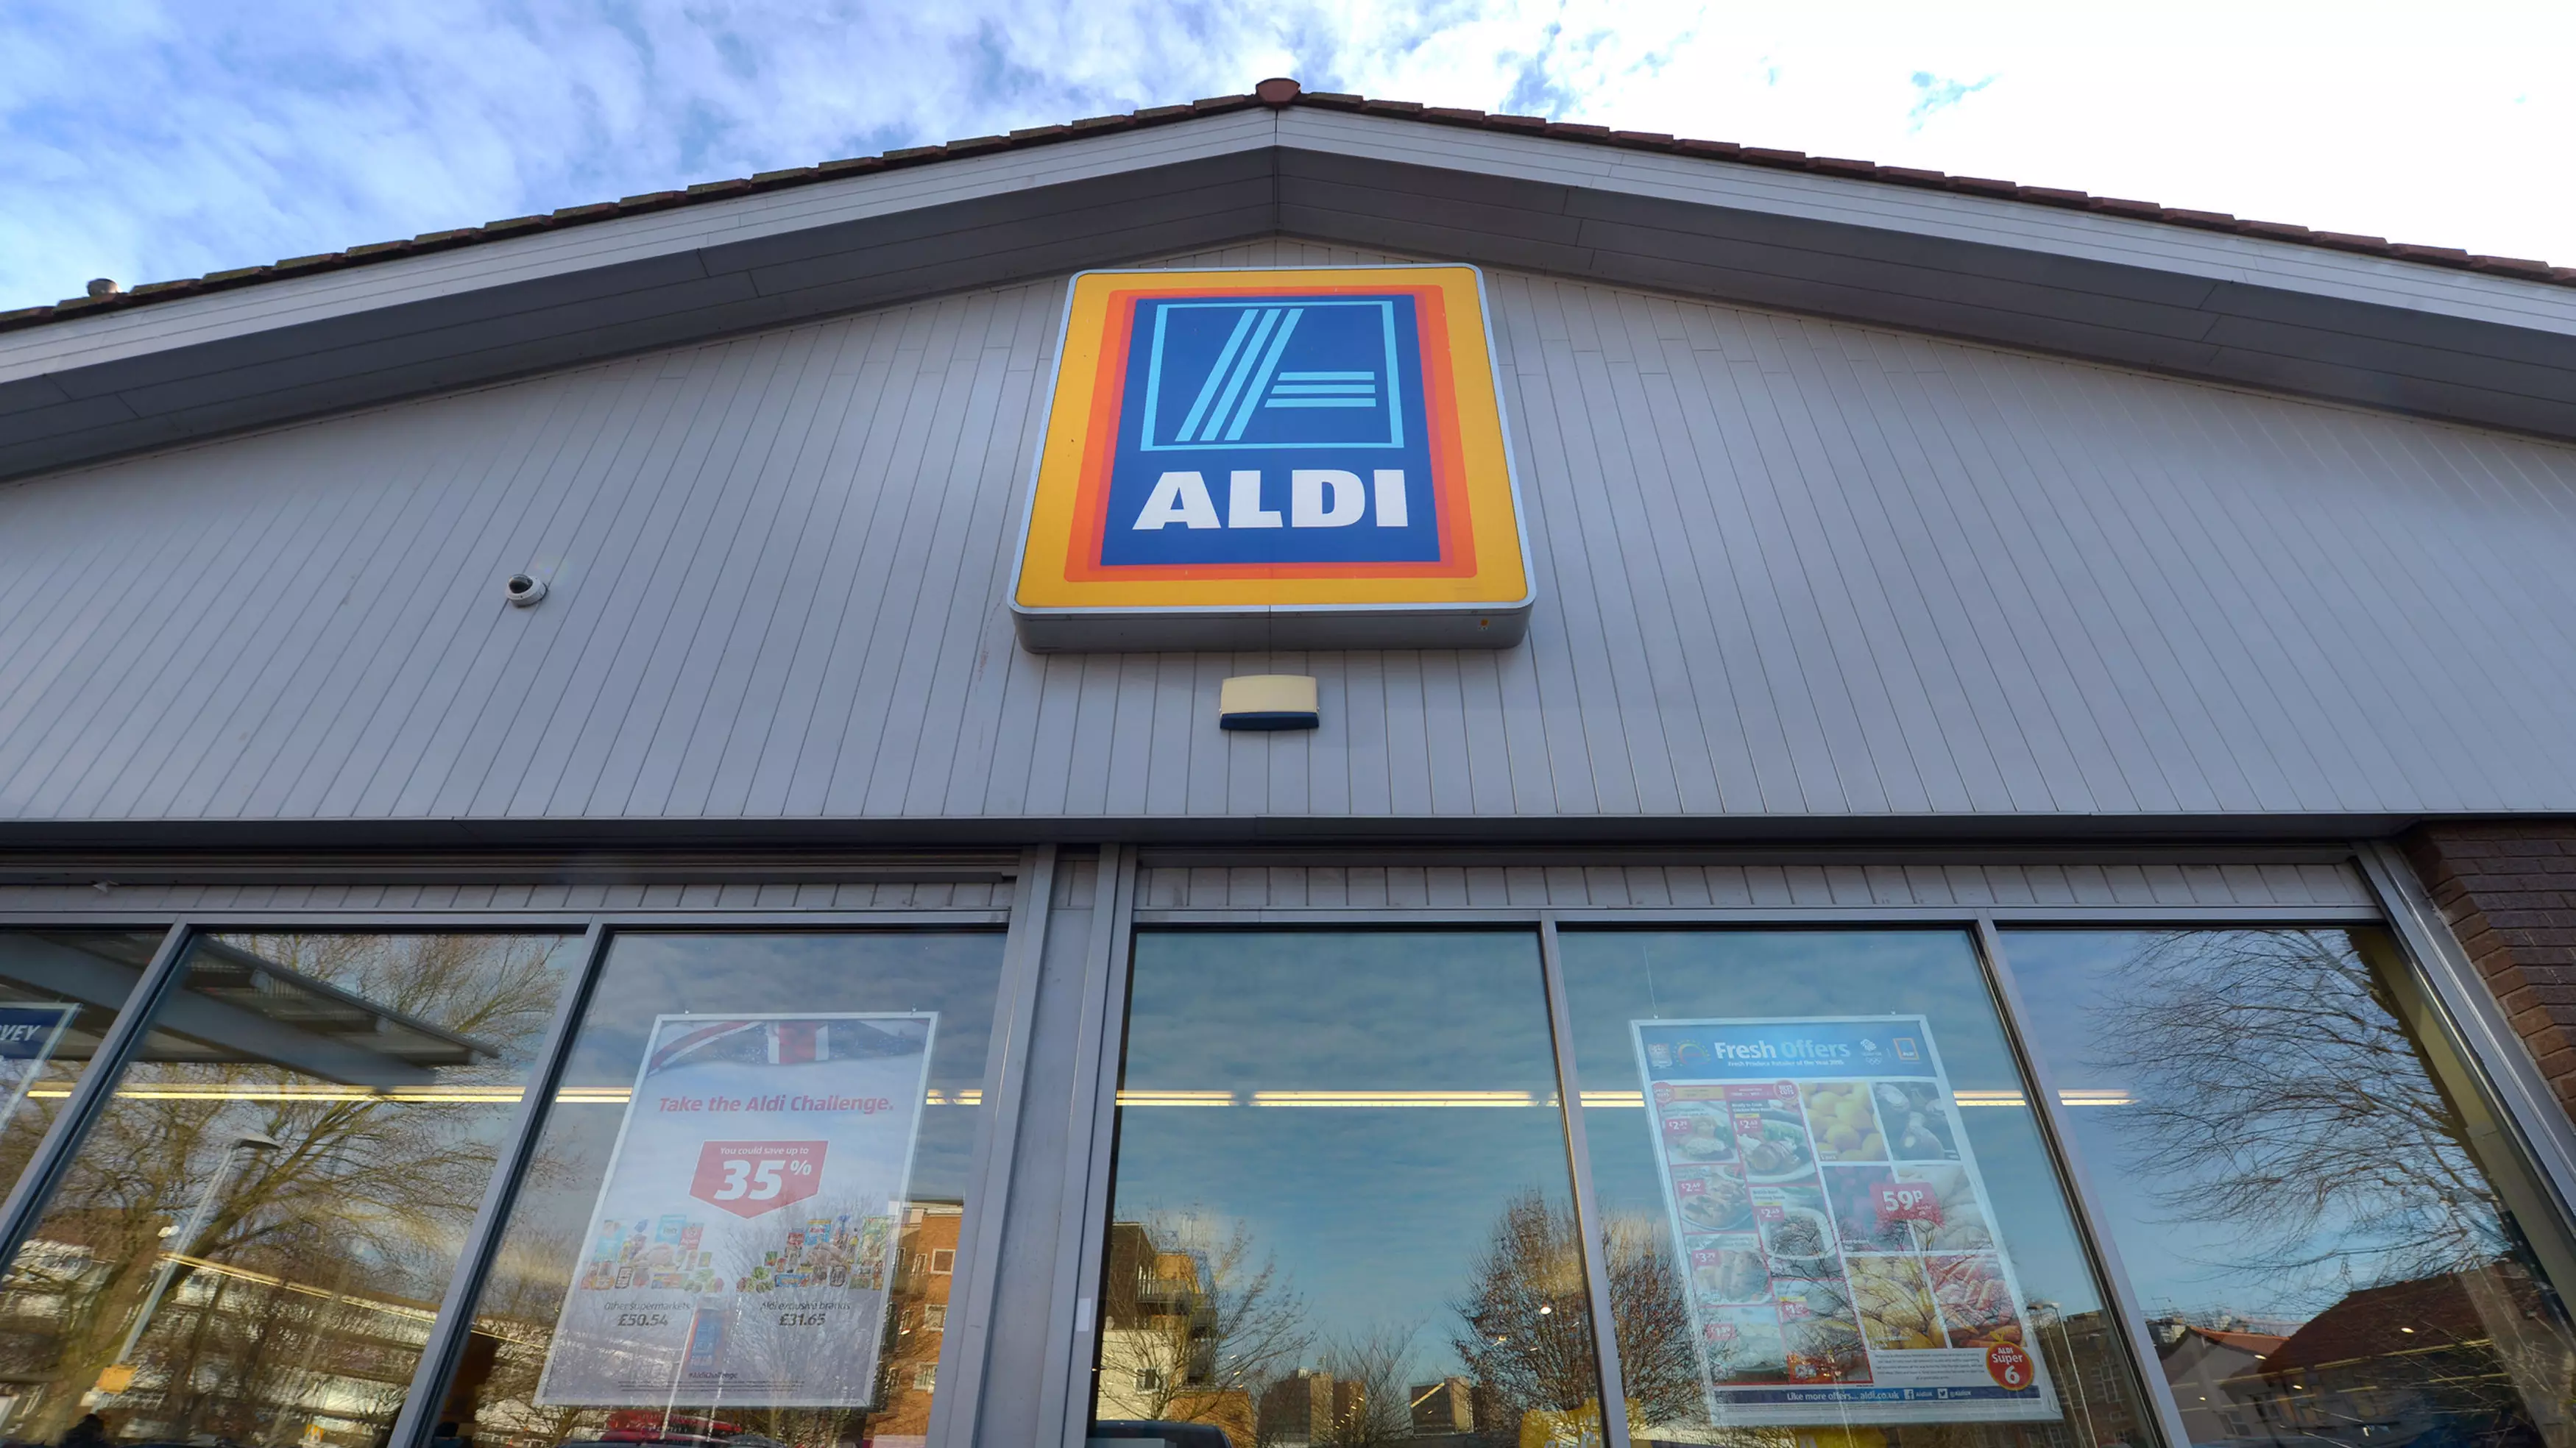 Aldi Is Giving Away Unsold Food To Those In Need On Christmas Eve